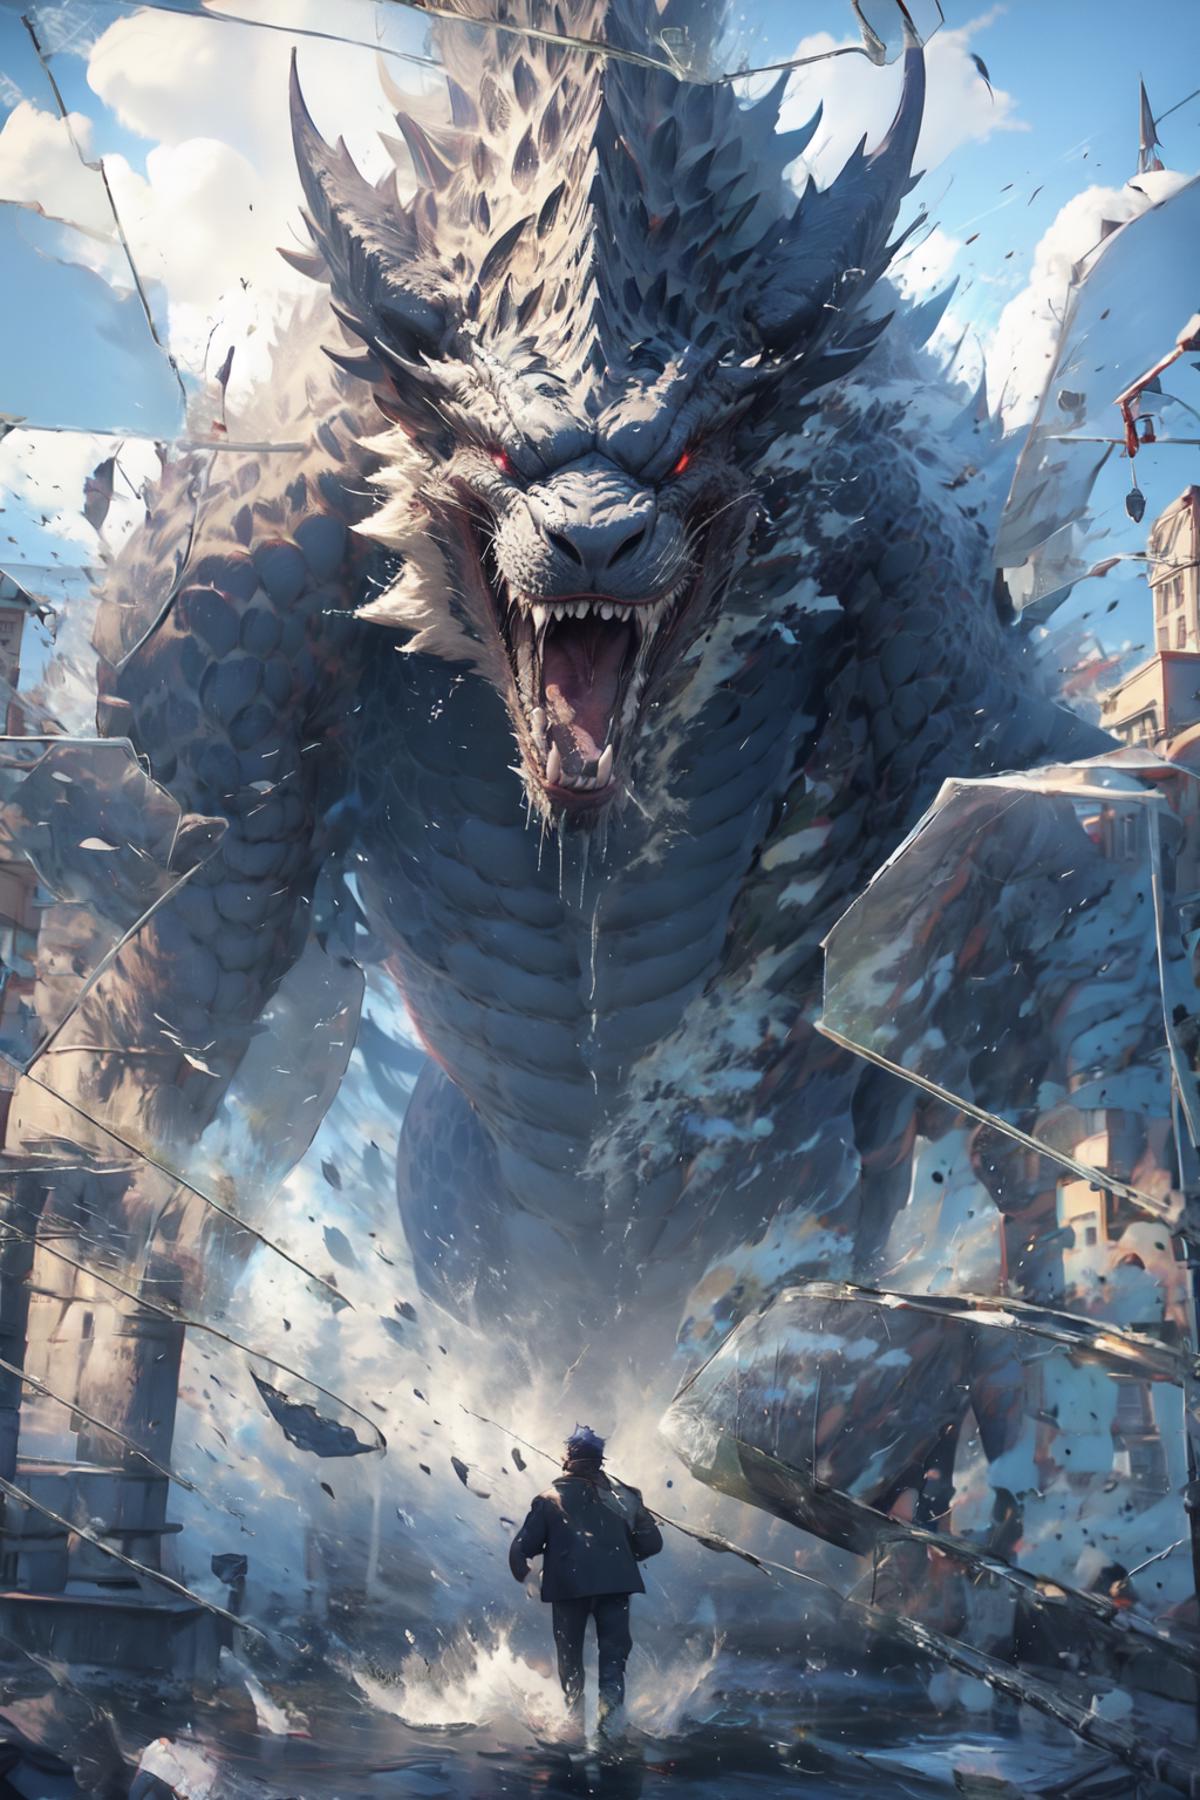 A giant dragon with a man standing in front of it.